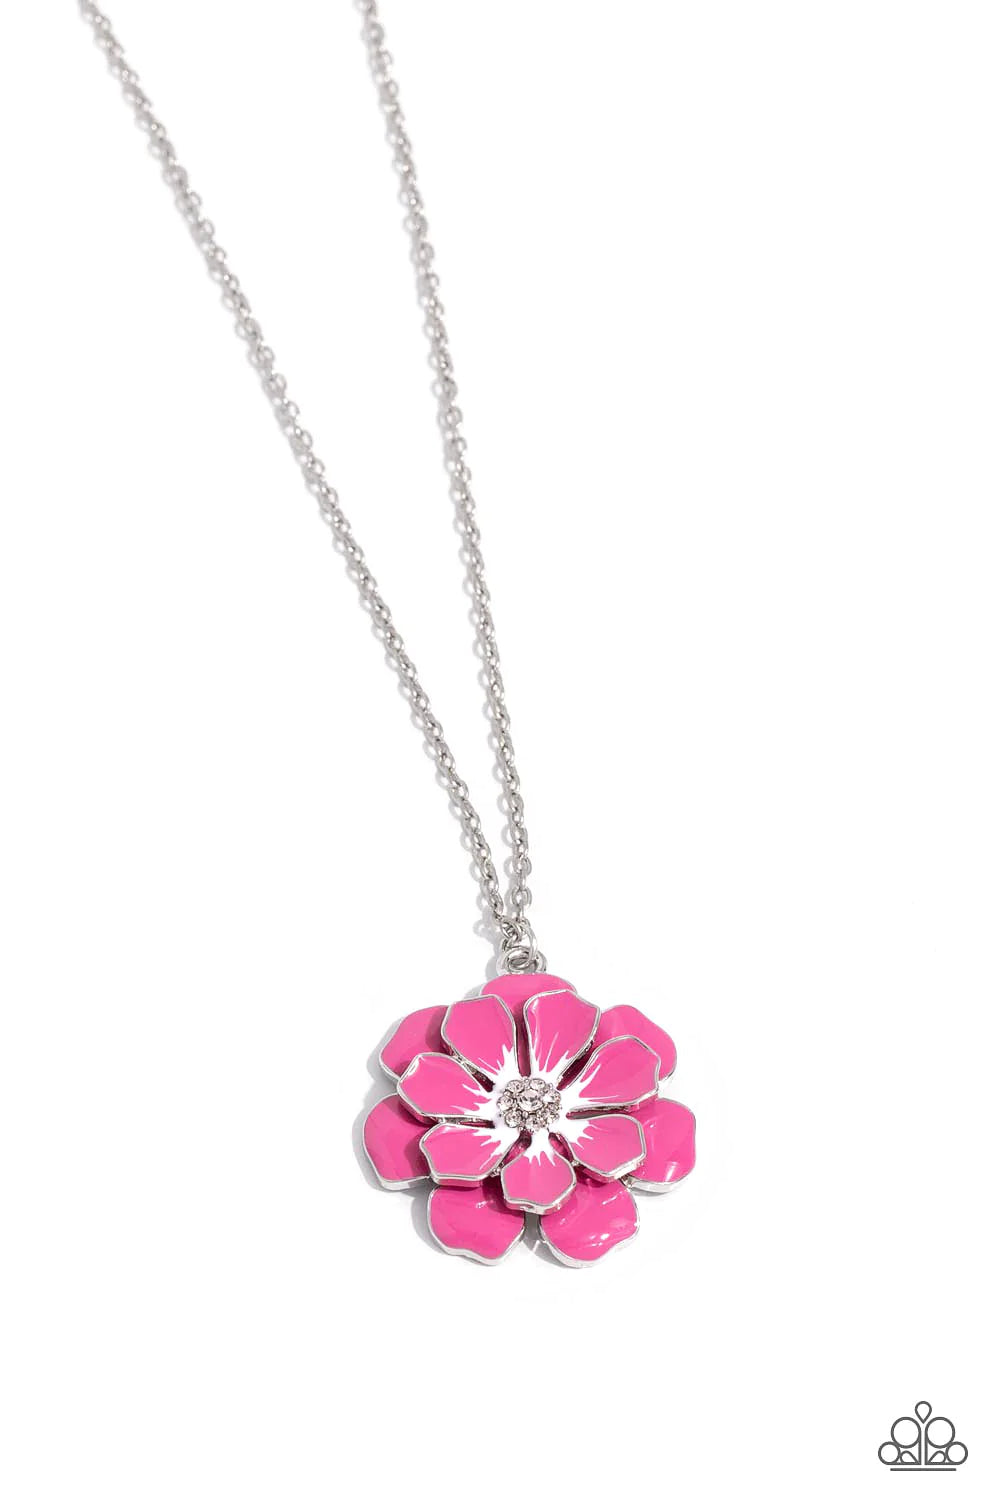 Beyond Blooming - Pink Necklace